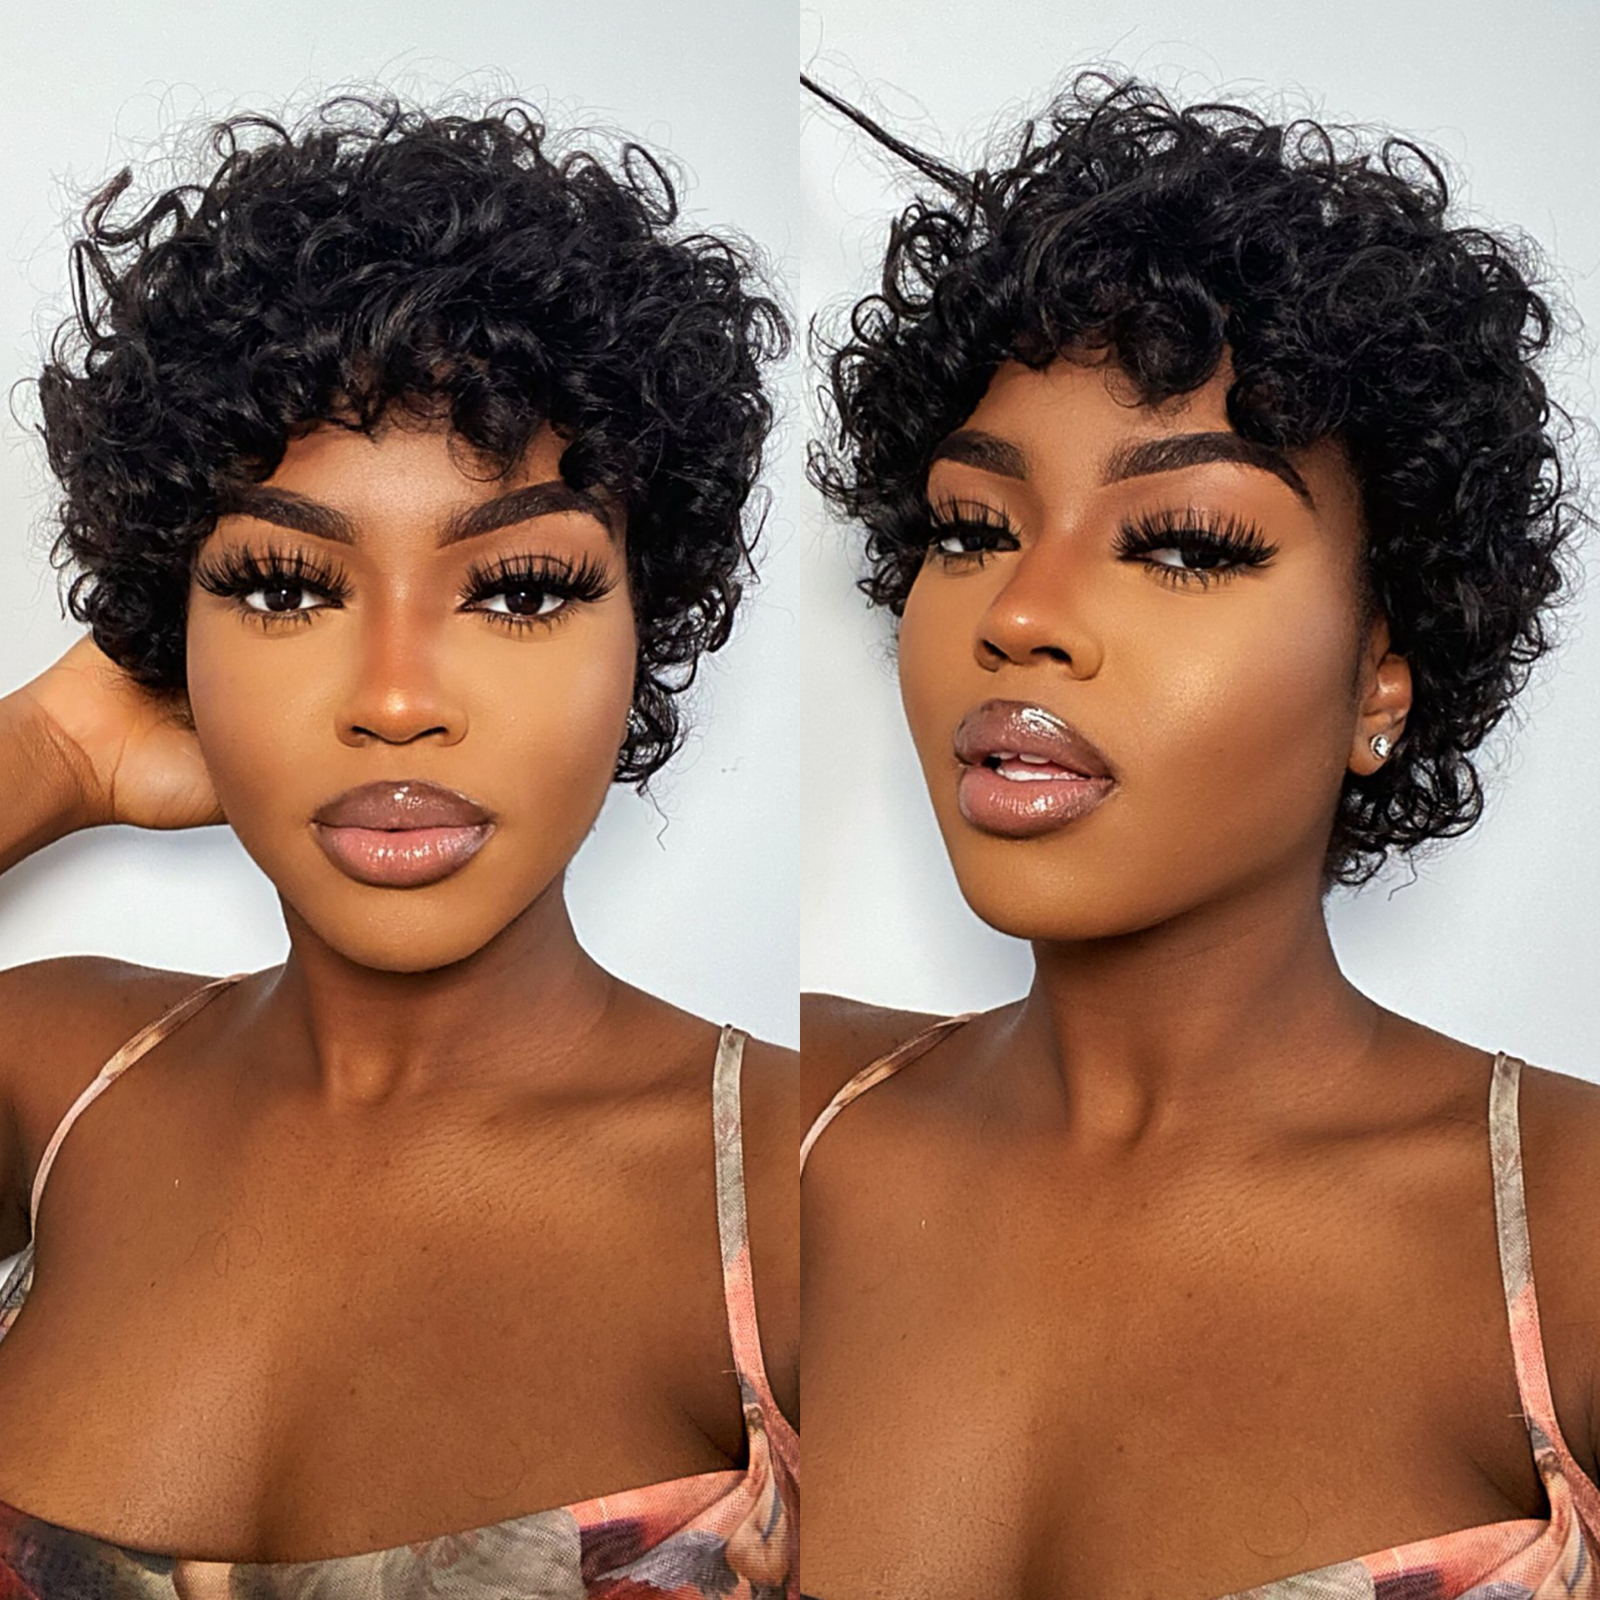 TOYOTRESS SHORT CURLY HUMAN HAIR WIGS 6